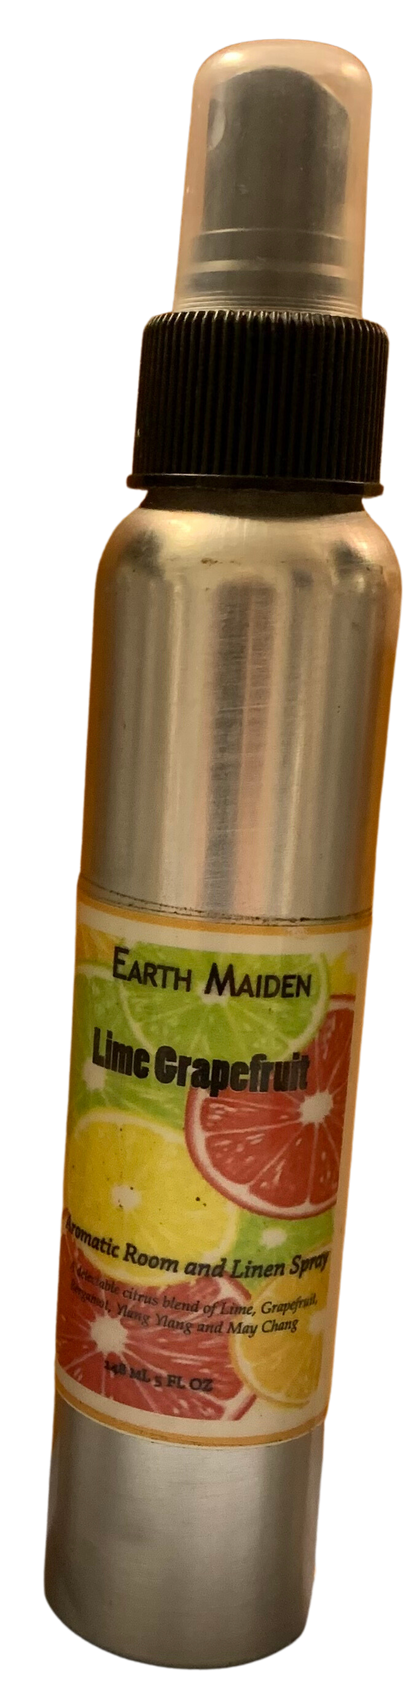 All Natural Lime Grapefruit Aroma Mist with Essential Oils in 5 ounce metal bullet container with fine mist sprayer.